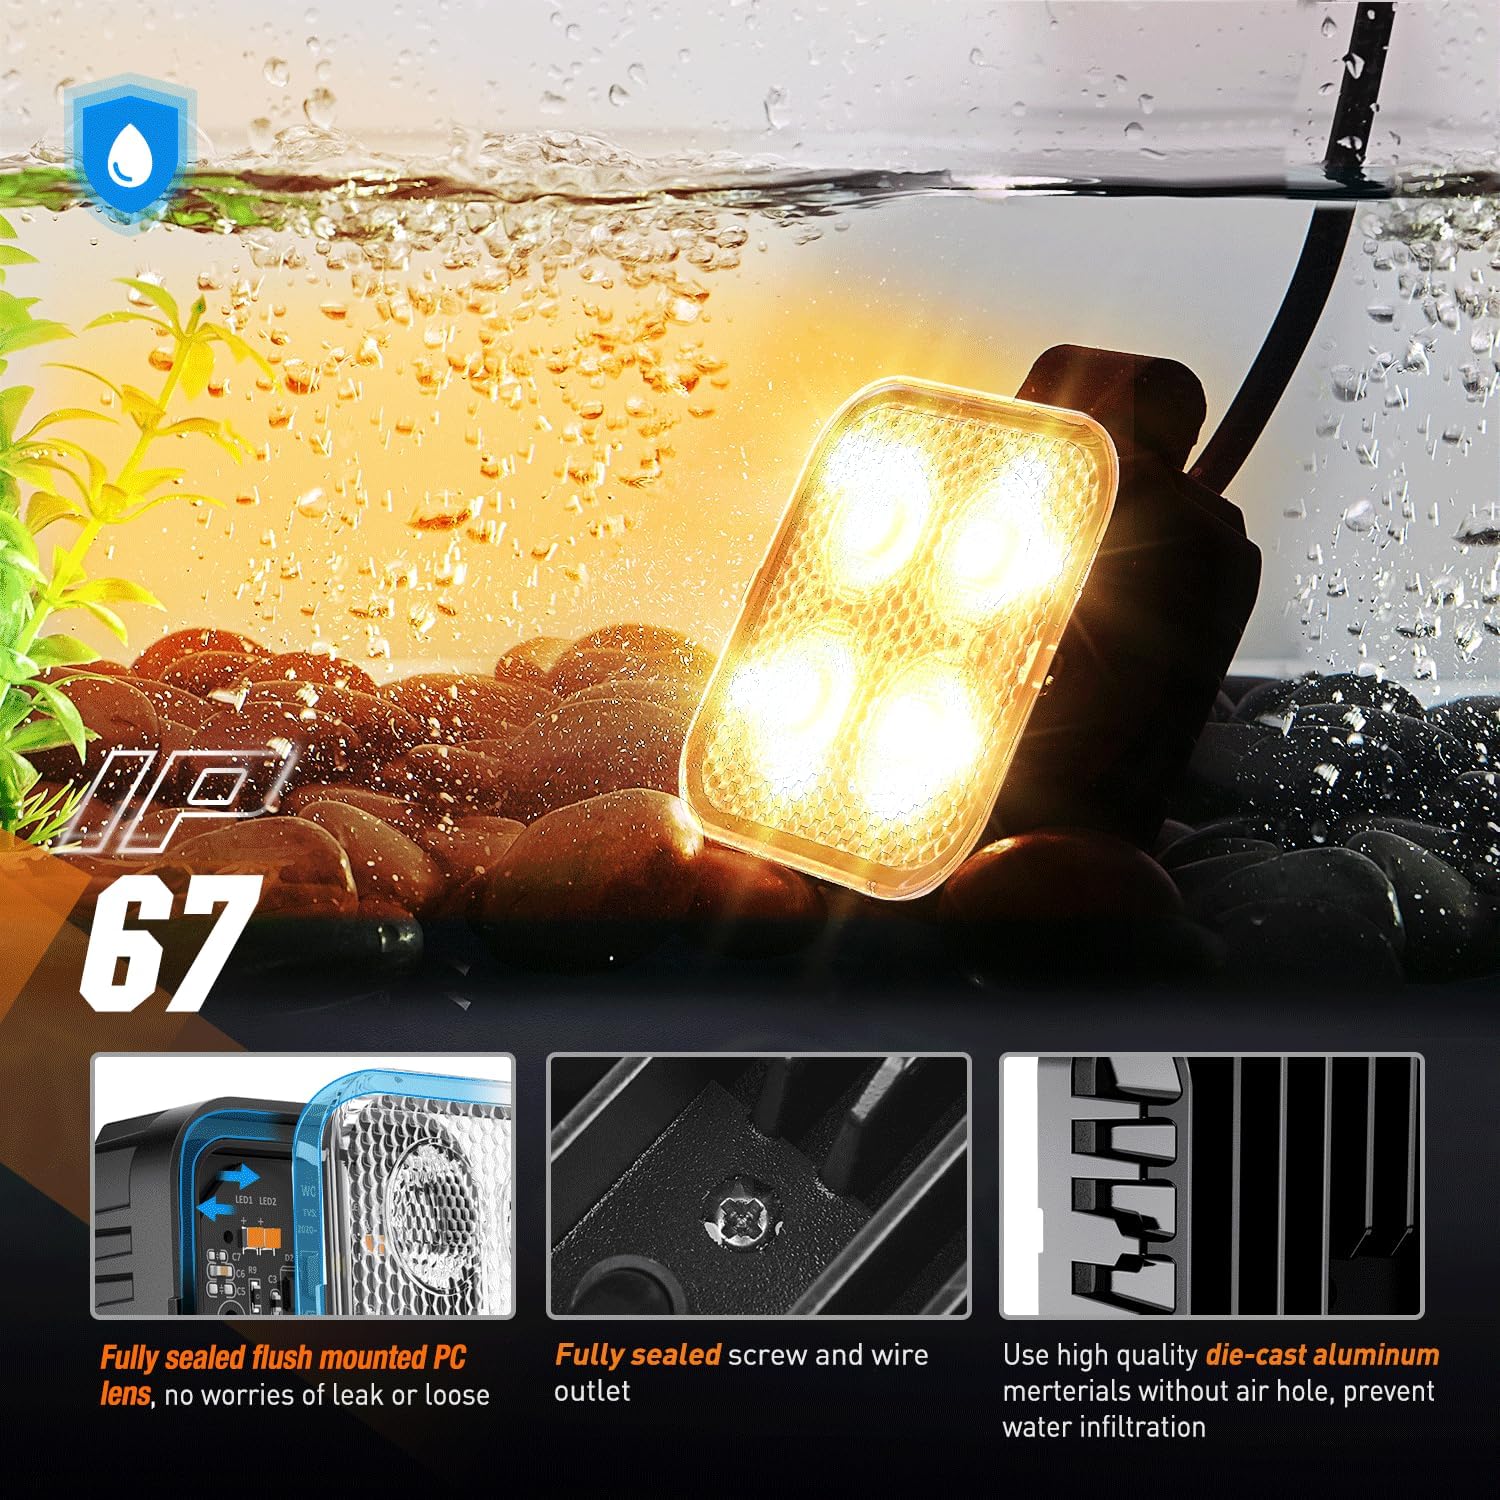 3" 15W 2100LM Square Amber Flood Built-in EMC Led Work Lights (Pair) Nilight